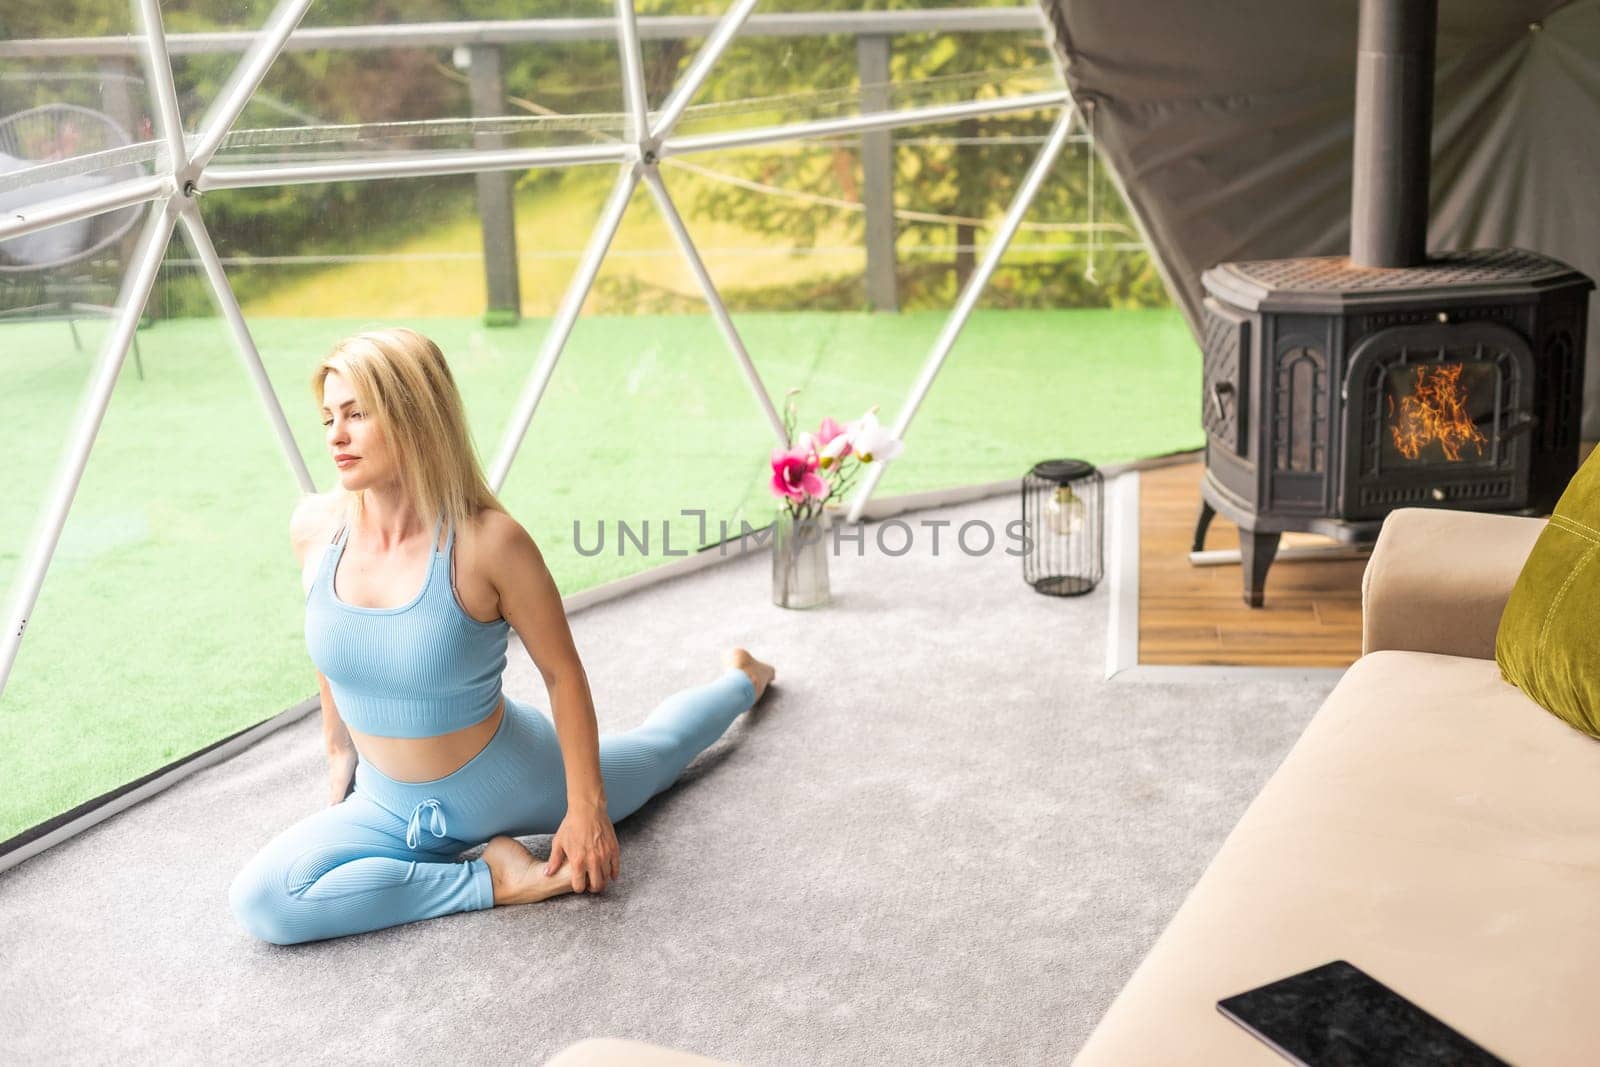 A woman is in a geo dome glamping tent. Glamping vacation lifestyle concept